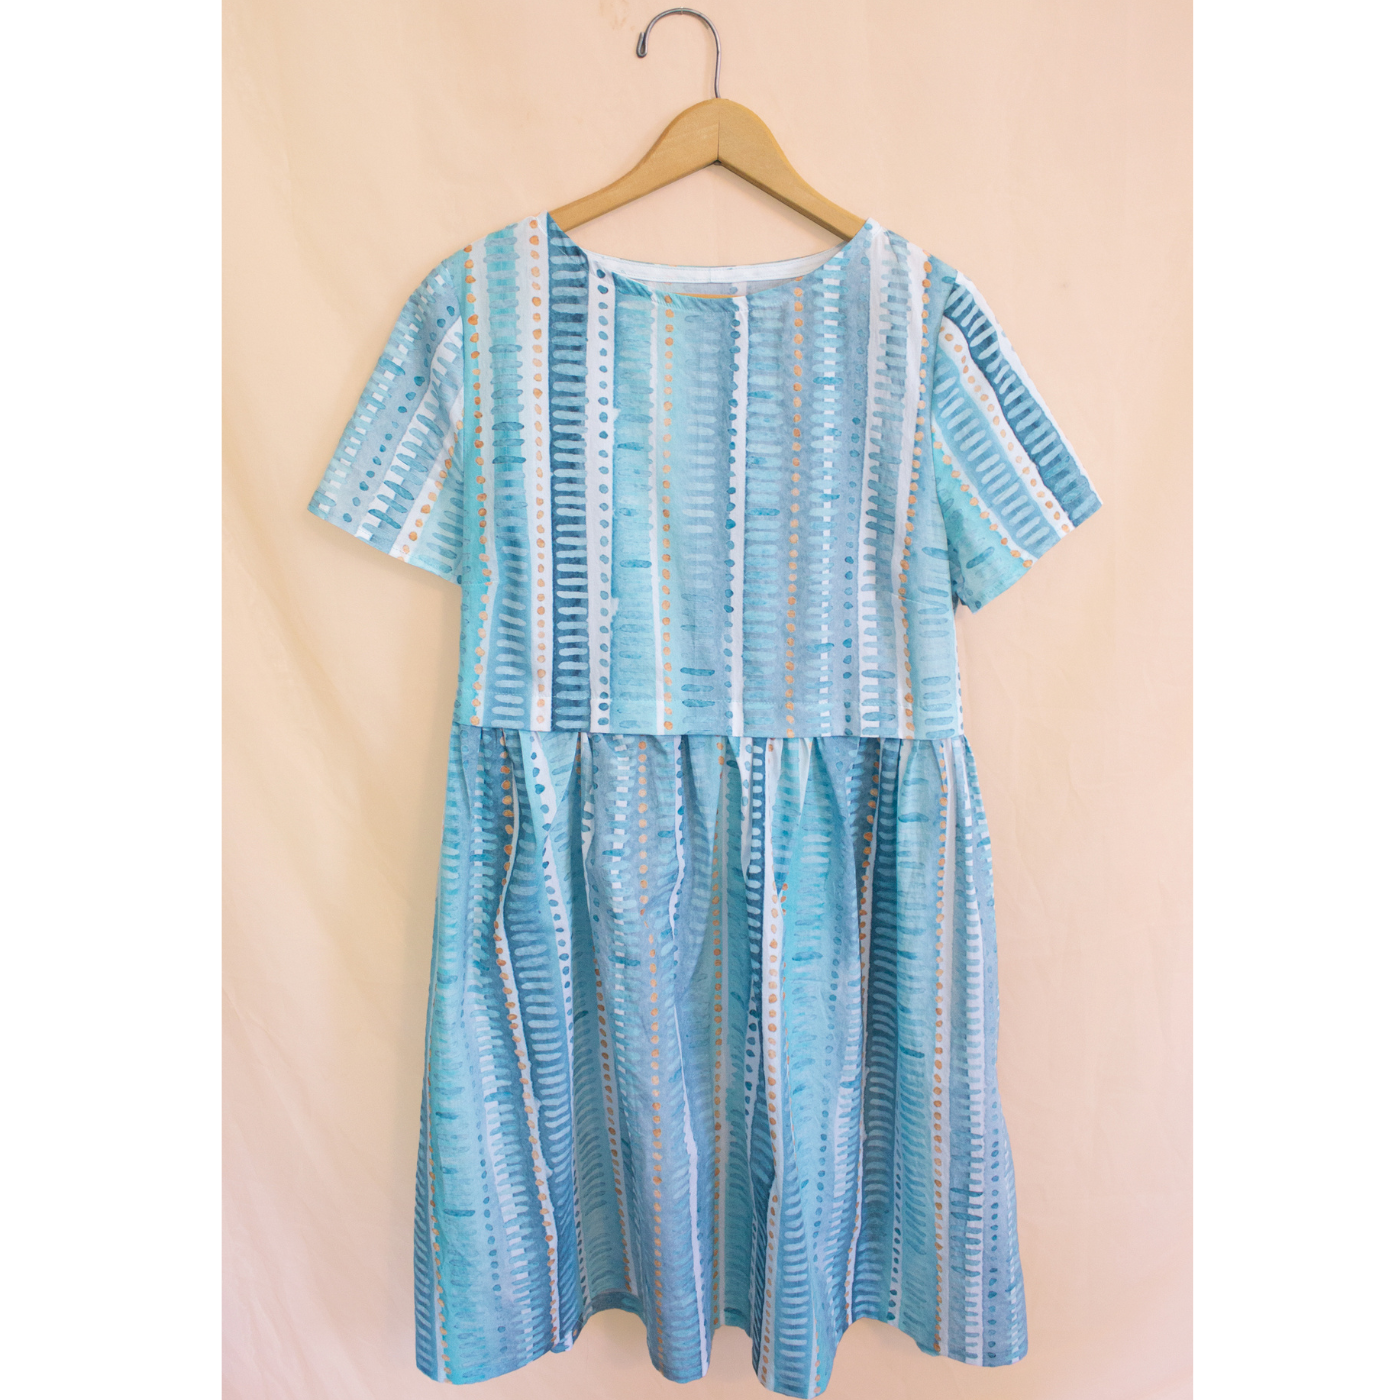 dress with a print with long vertical strips in various shades of blue, gray and white and small horizontal lines running down the vertical strips in a differing blue, gray or white shade hangs on a wooden hanger in front of a peach wall.